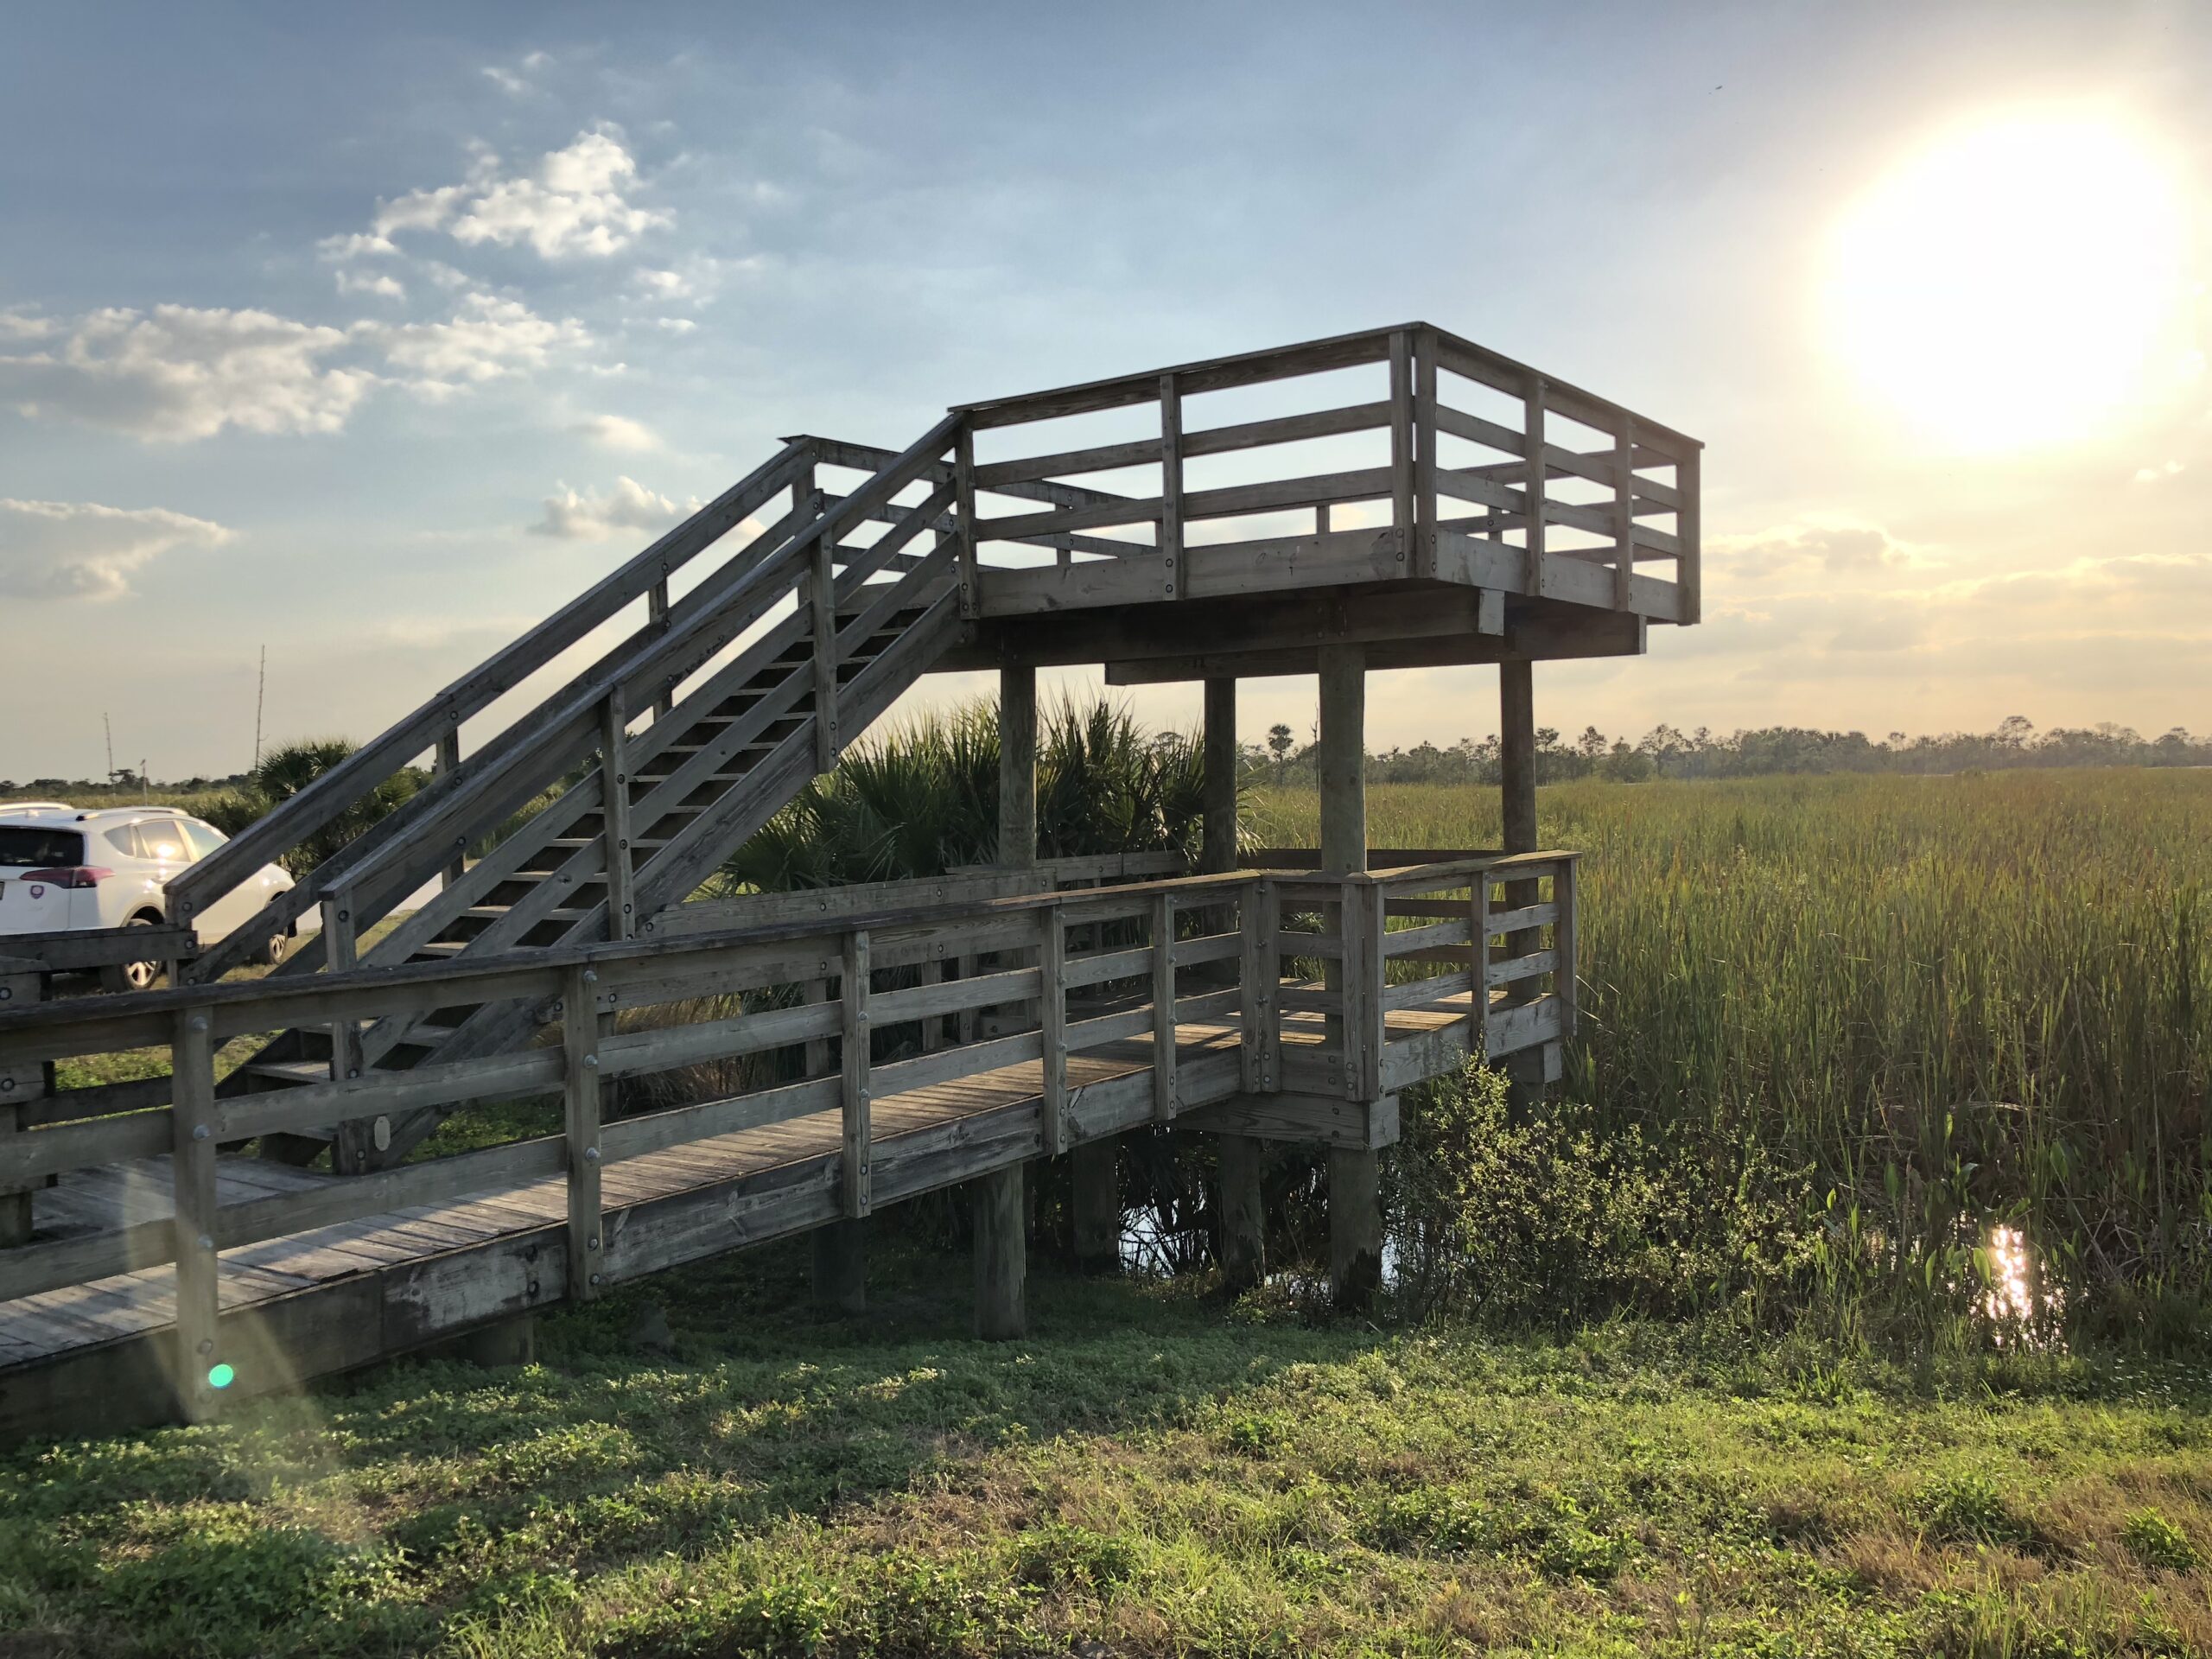 An observation deck at the Ritch Grissom Memorial Wetlands in Viera, FL